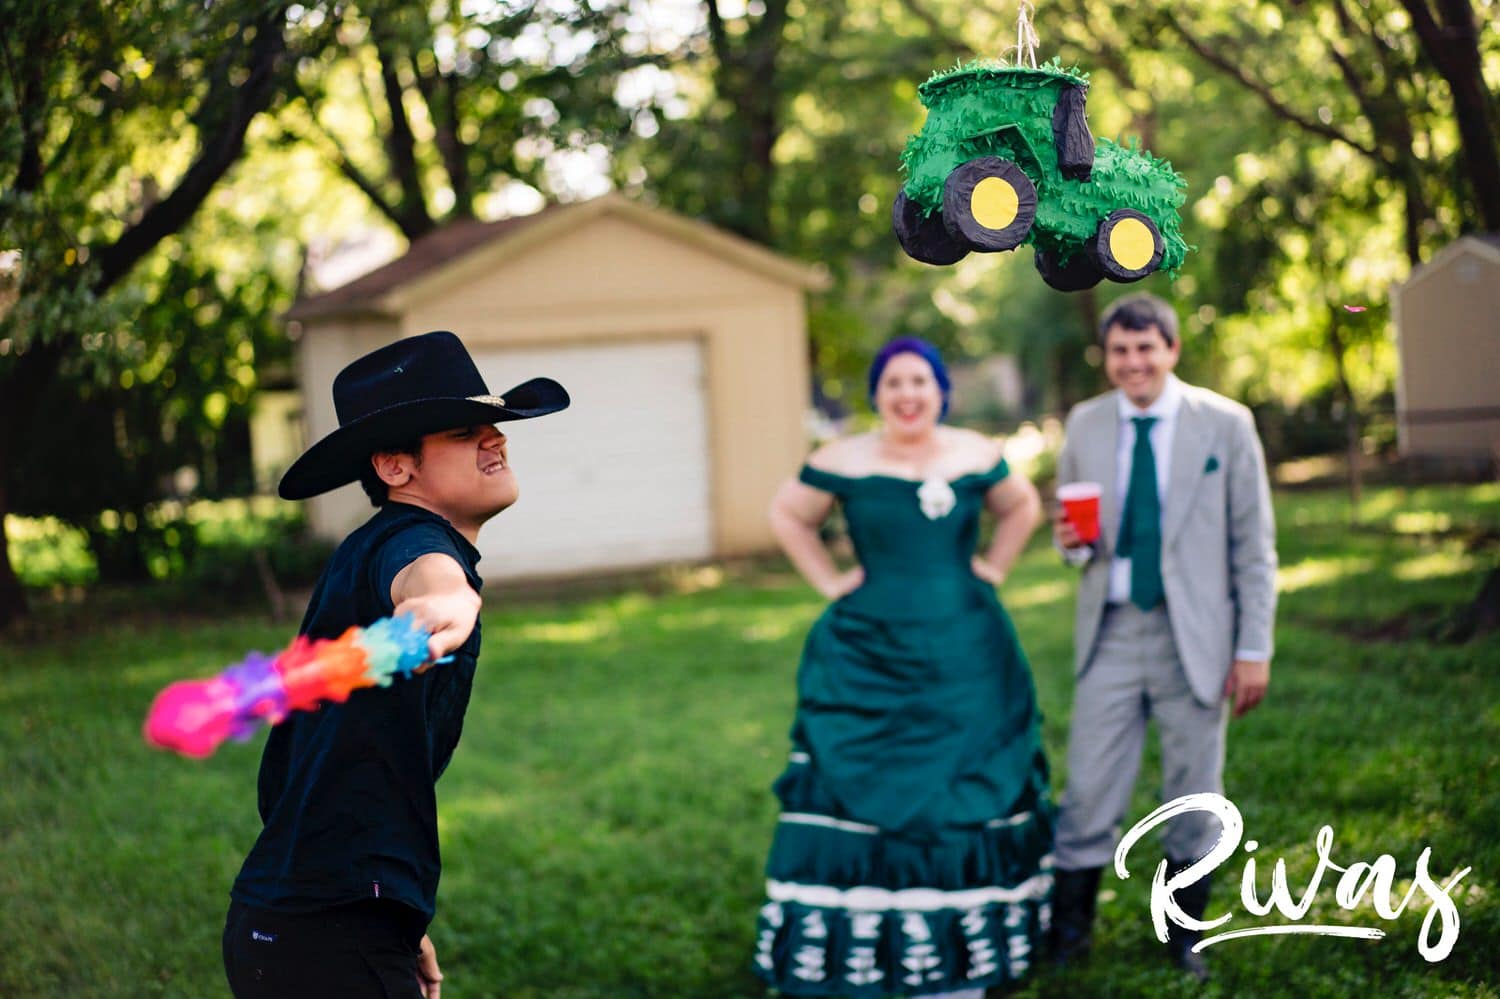 A candid picture of a teenager in a black cowboy hat wildly swinging a colorful stick at  a green tractor pinata while a bride and groom look on in the background with smiles on their faces during their intimate backyard summer wedding reception. 